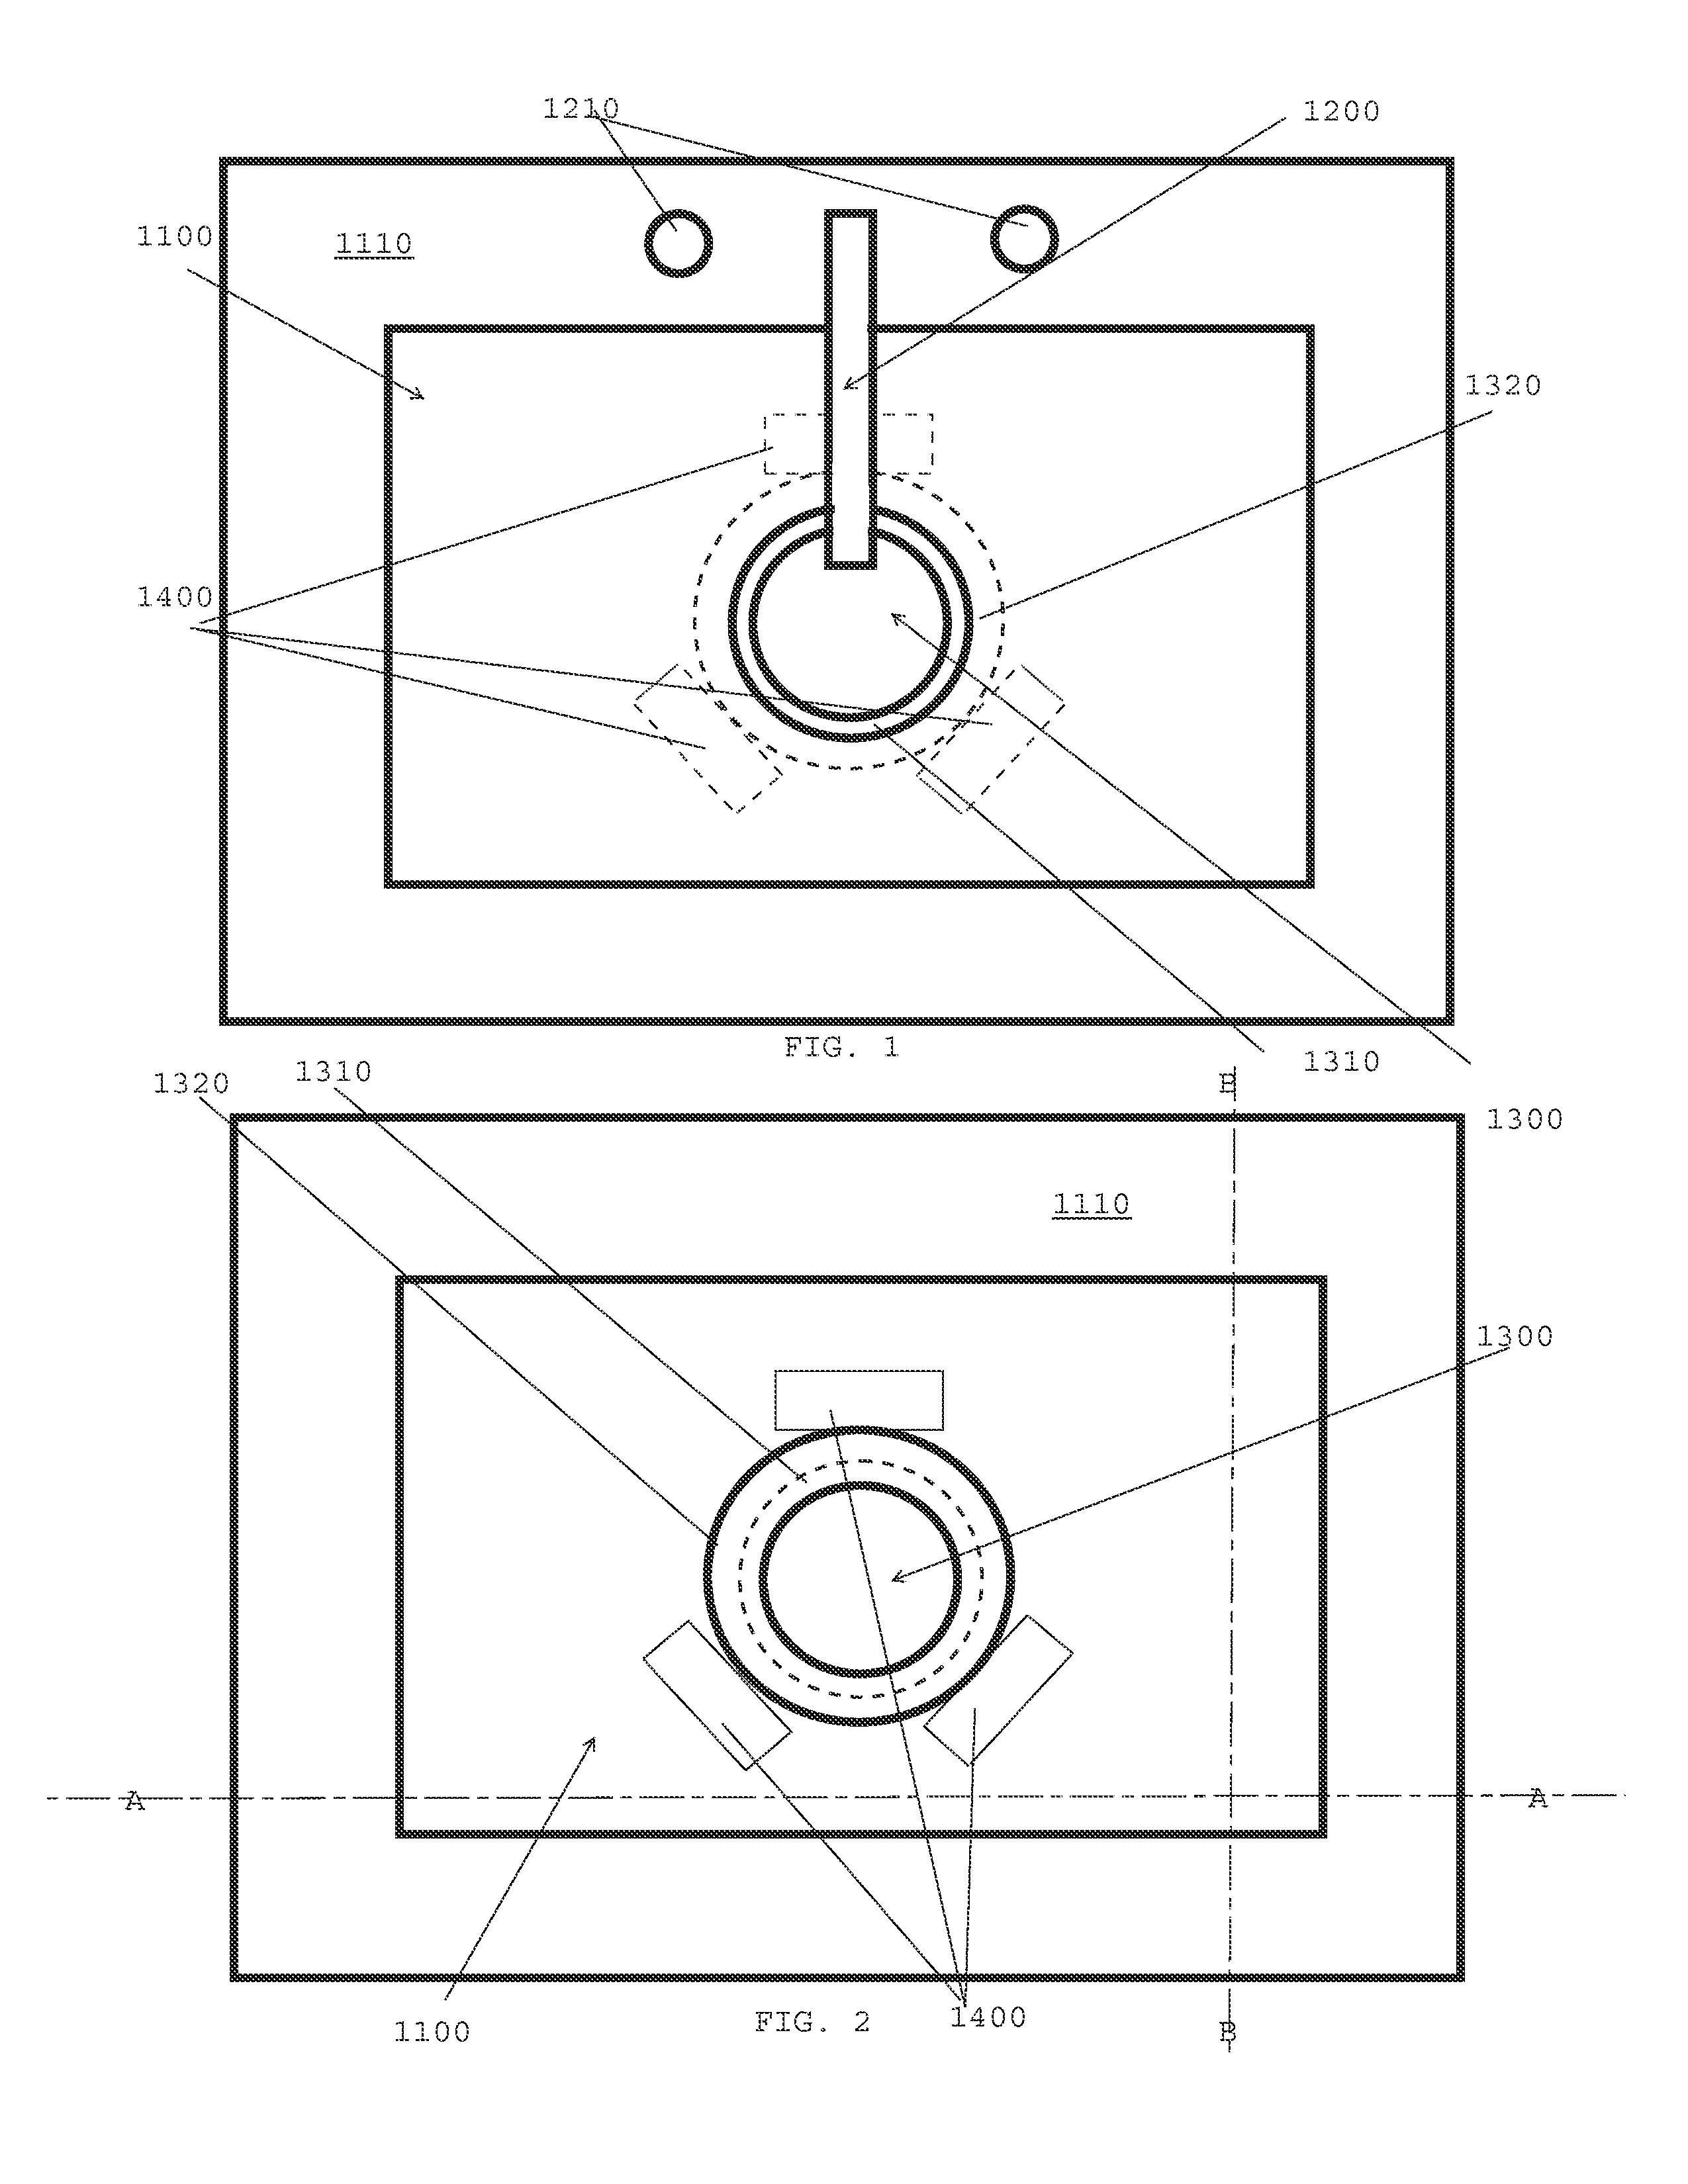 Apparatus for Preventing Flatware from Passing through the Drain of a Wash Basin or Sink, and Related Methods of Use